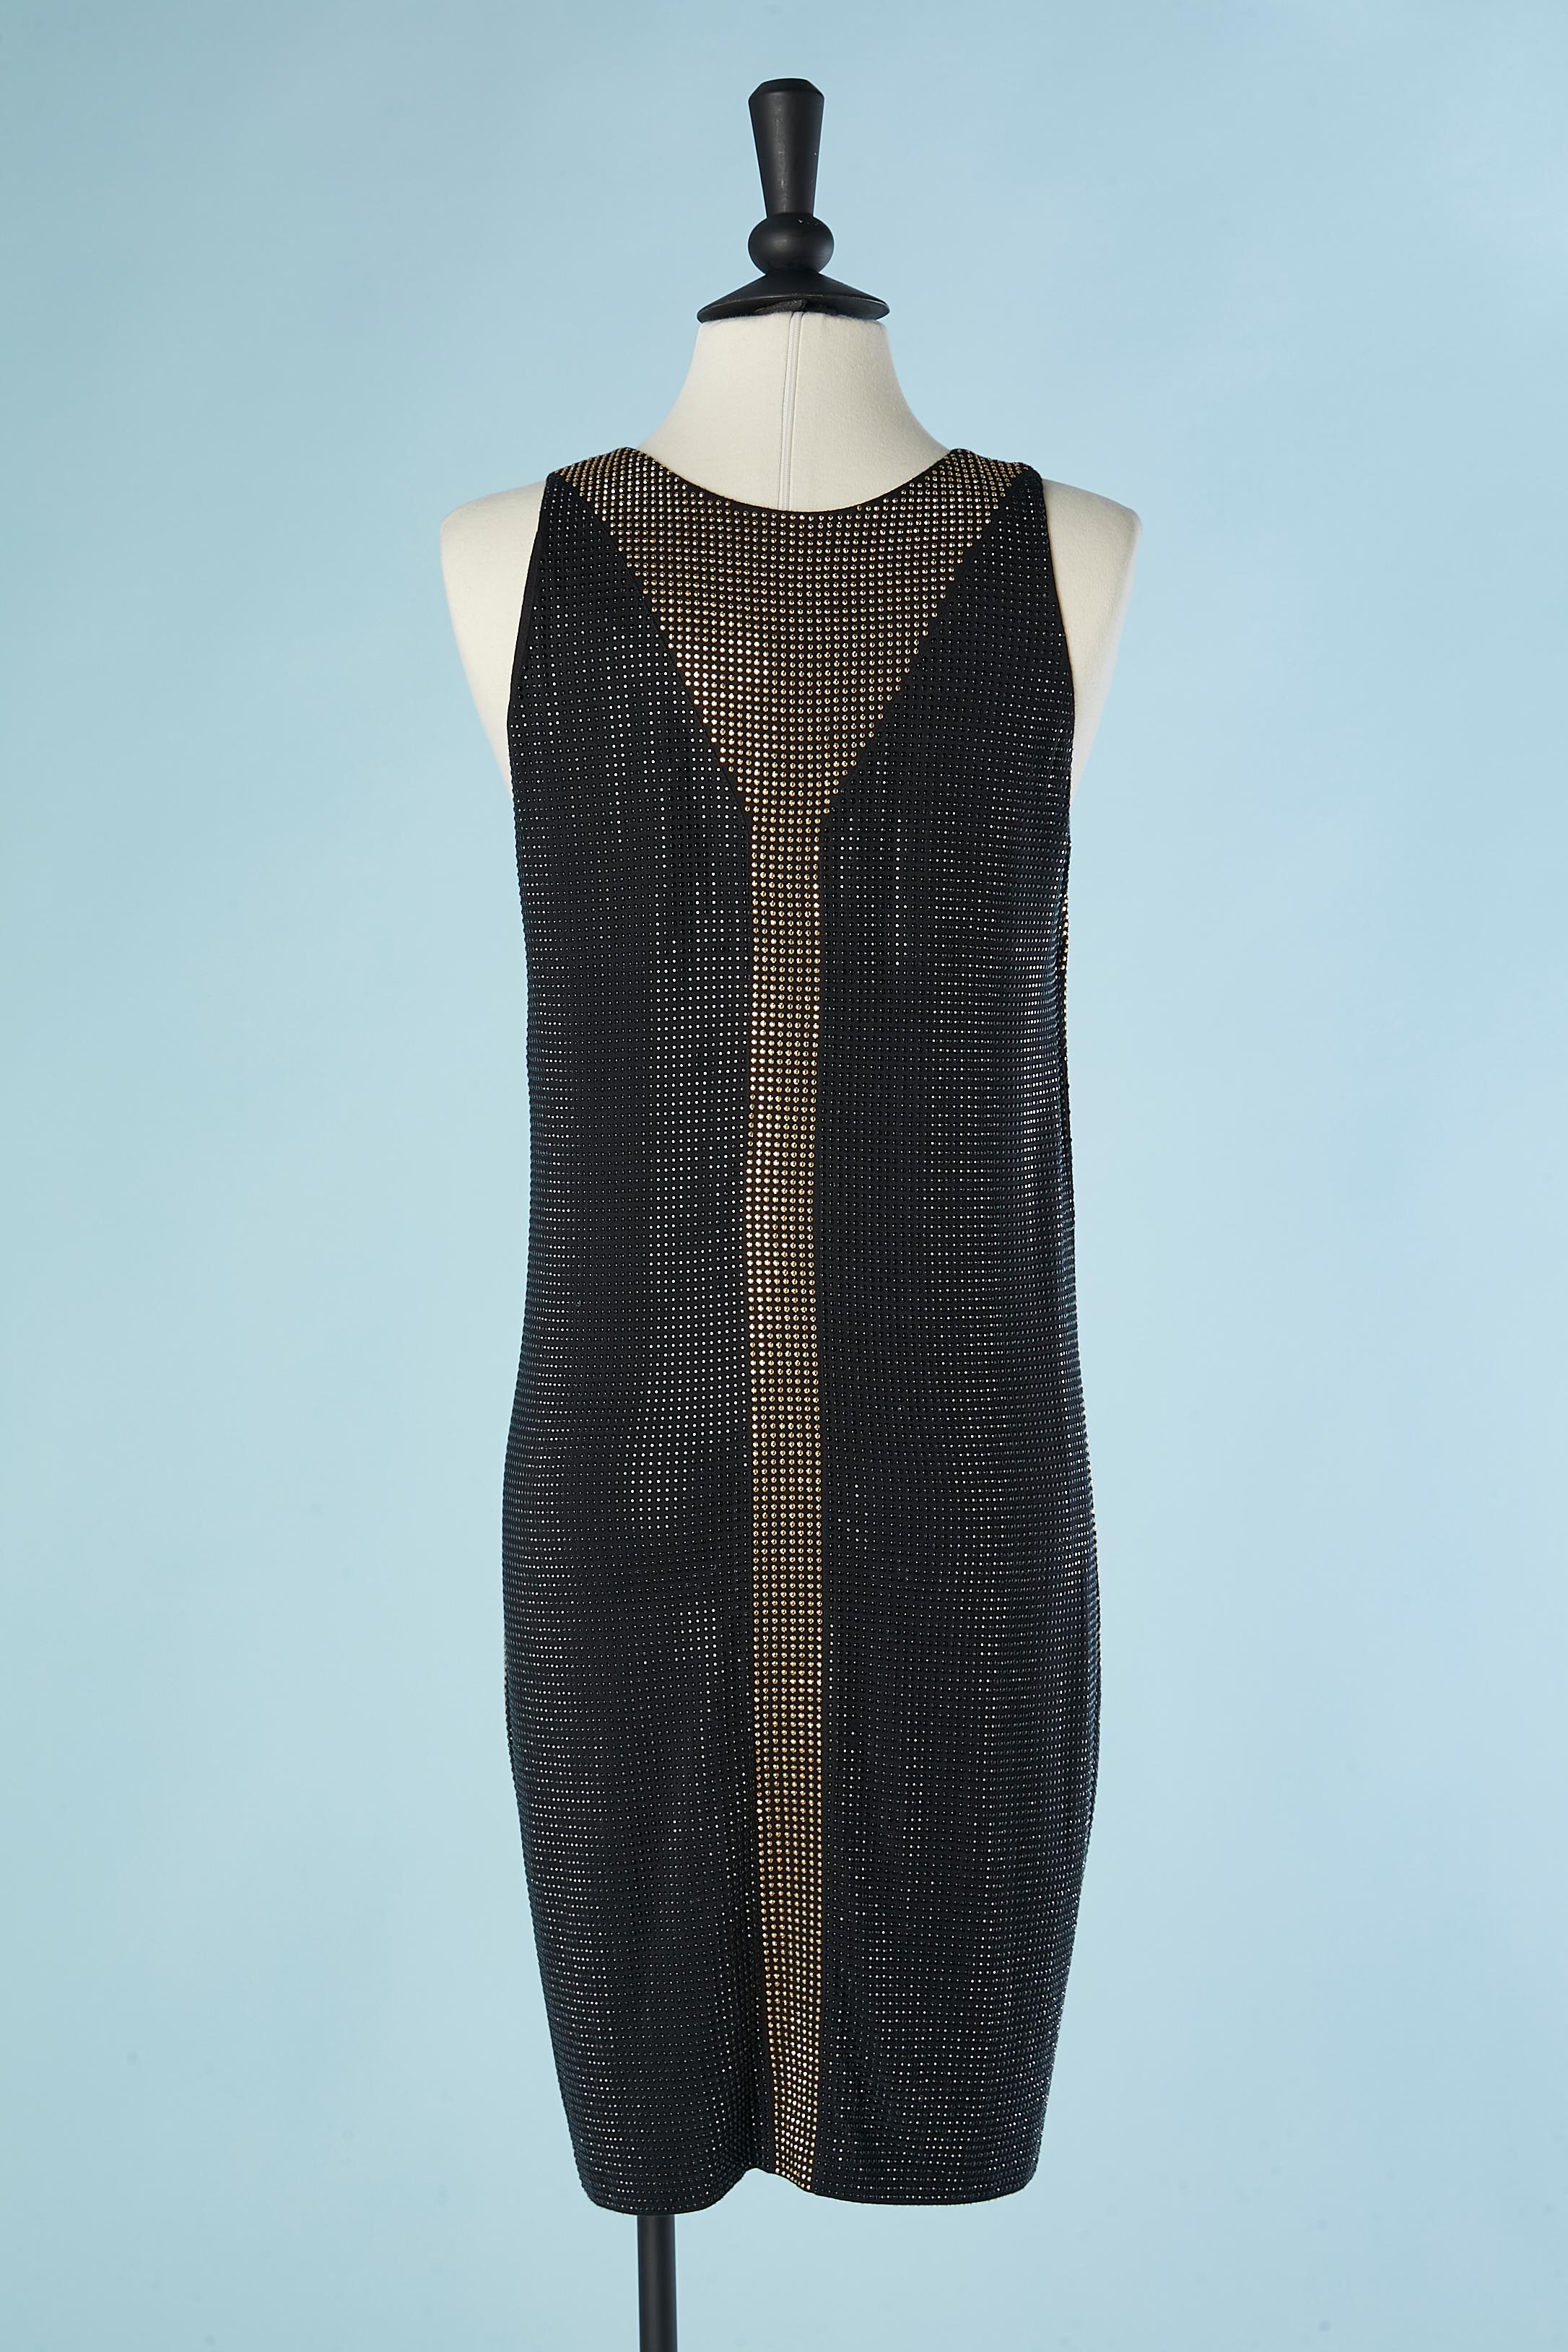 Sleeveless jersey cocktail dress with gold and black studs Versace Collection In Excellent Condition For Sale In Saint-Ouen-Sur-Seine, FR